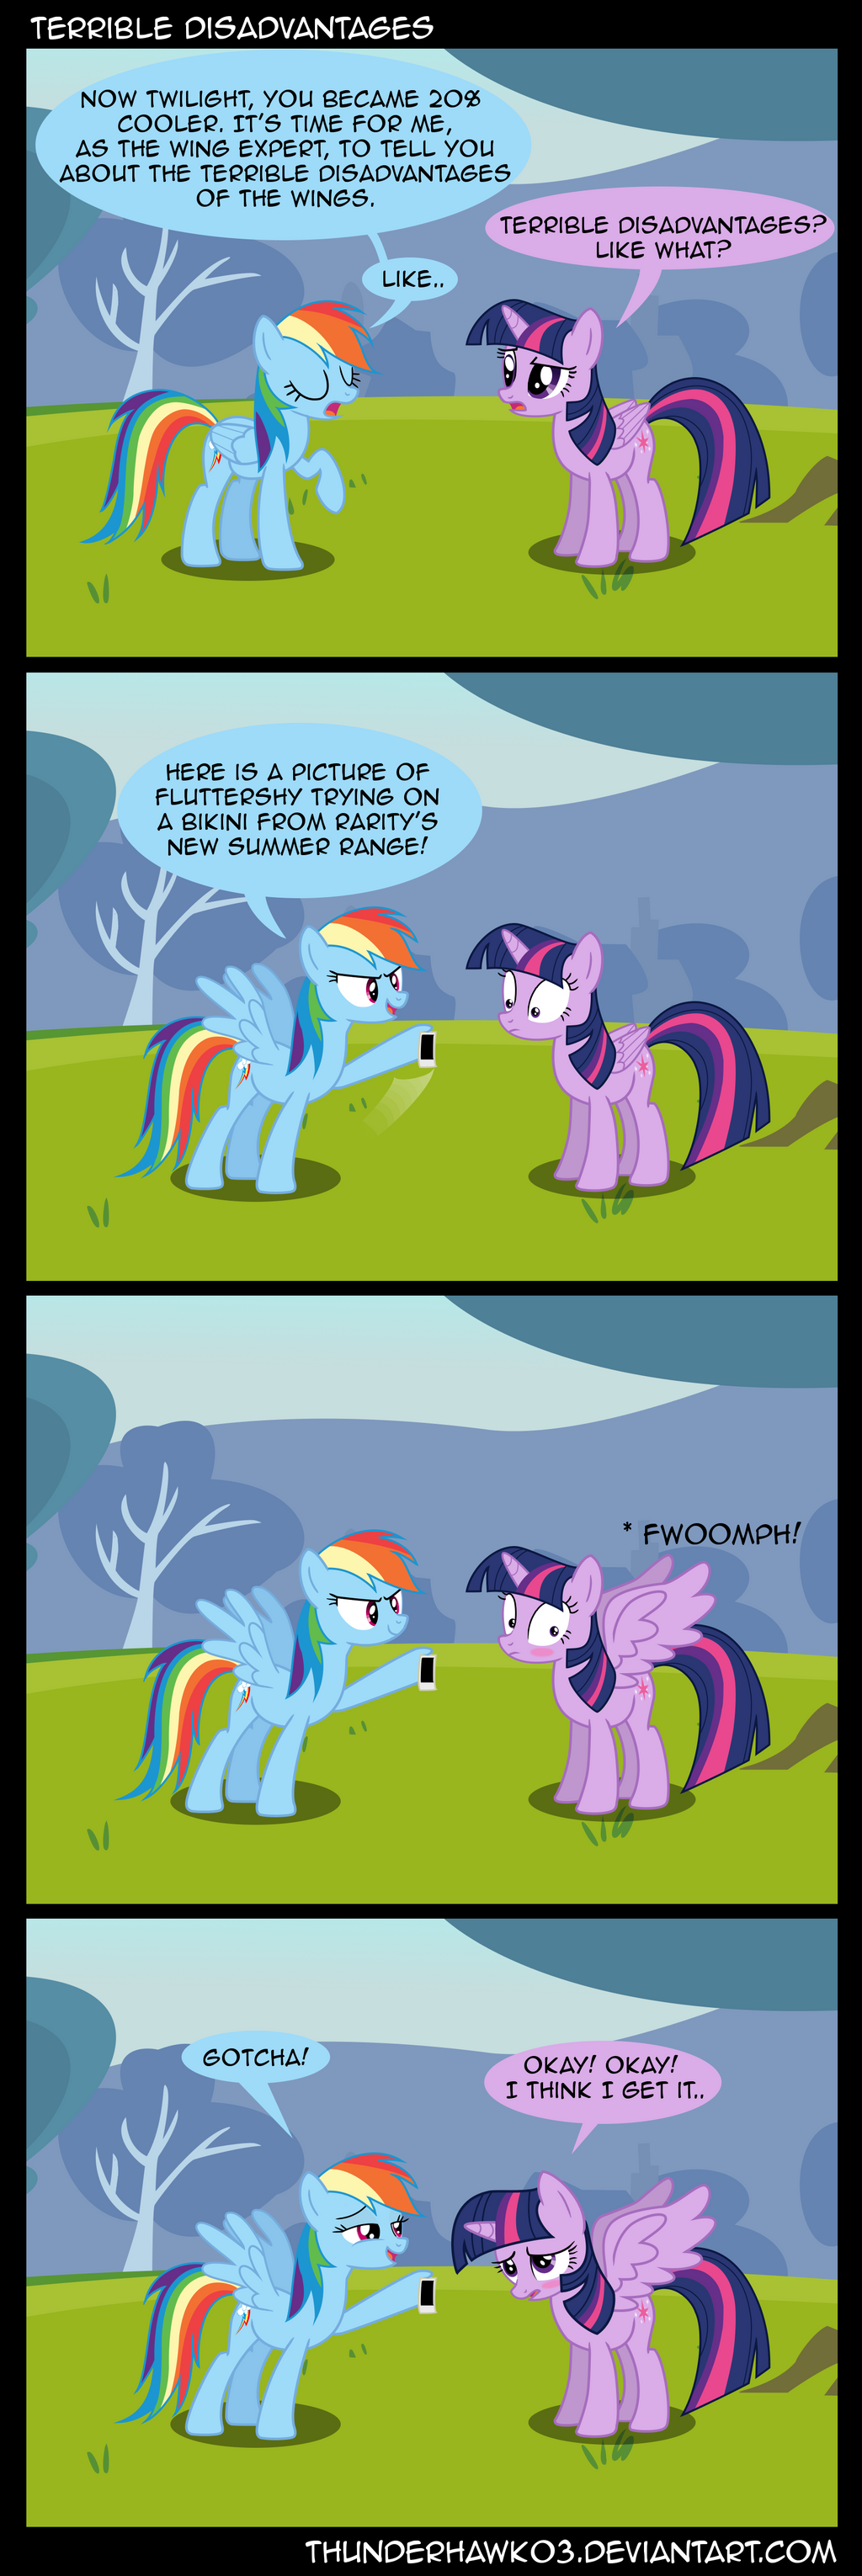 terrible_disadvantages_by_thunderhawk03-d5uwv8h.png